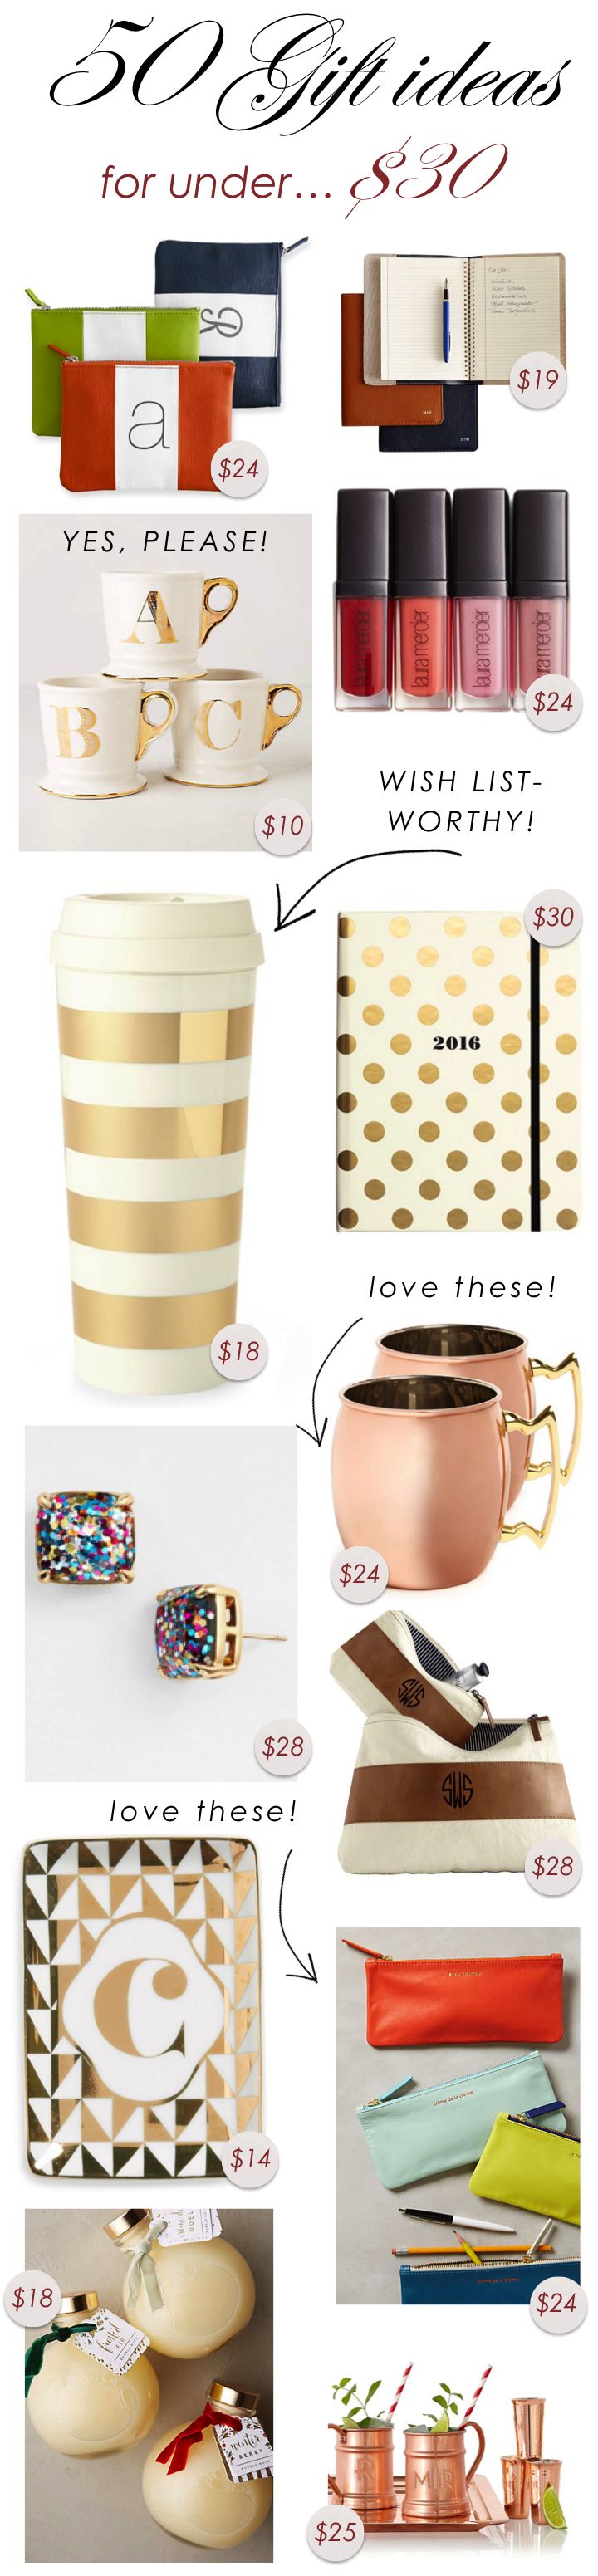 50 Gift Ideas for Under $30 www.theperfectpal...